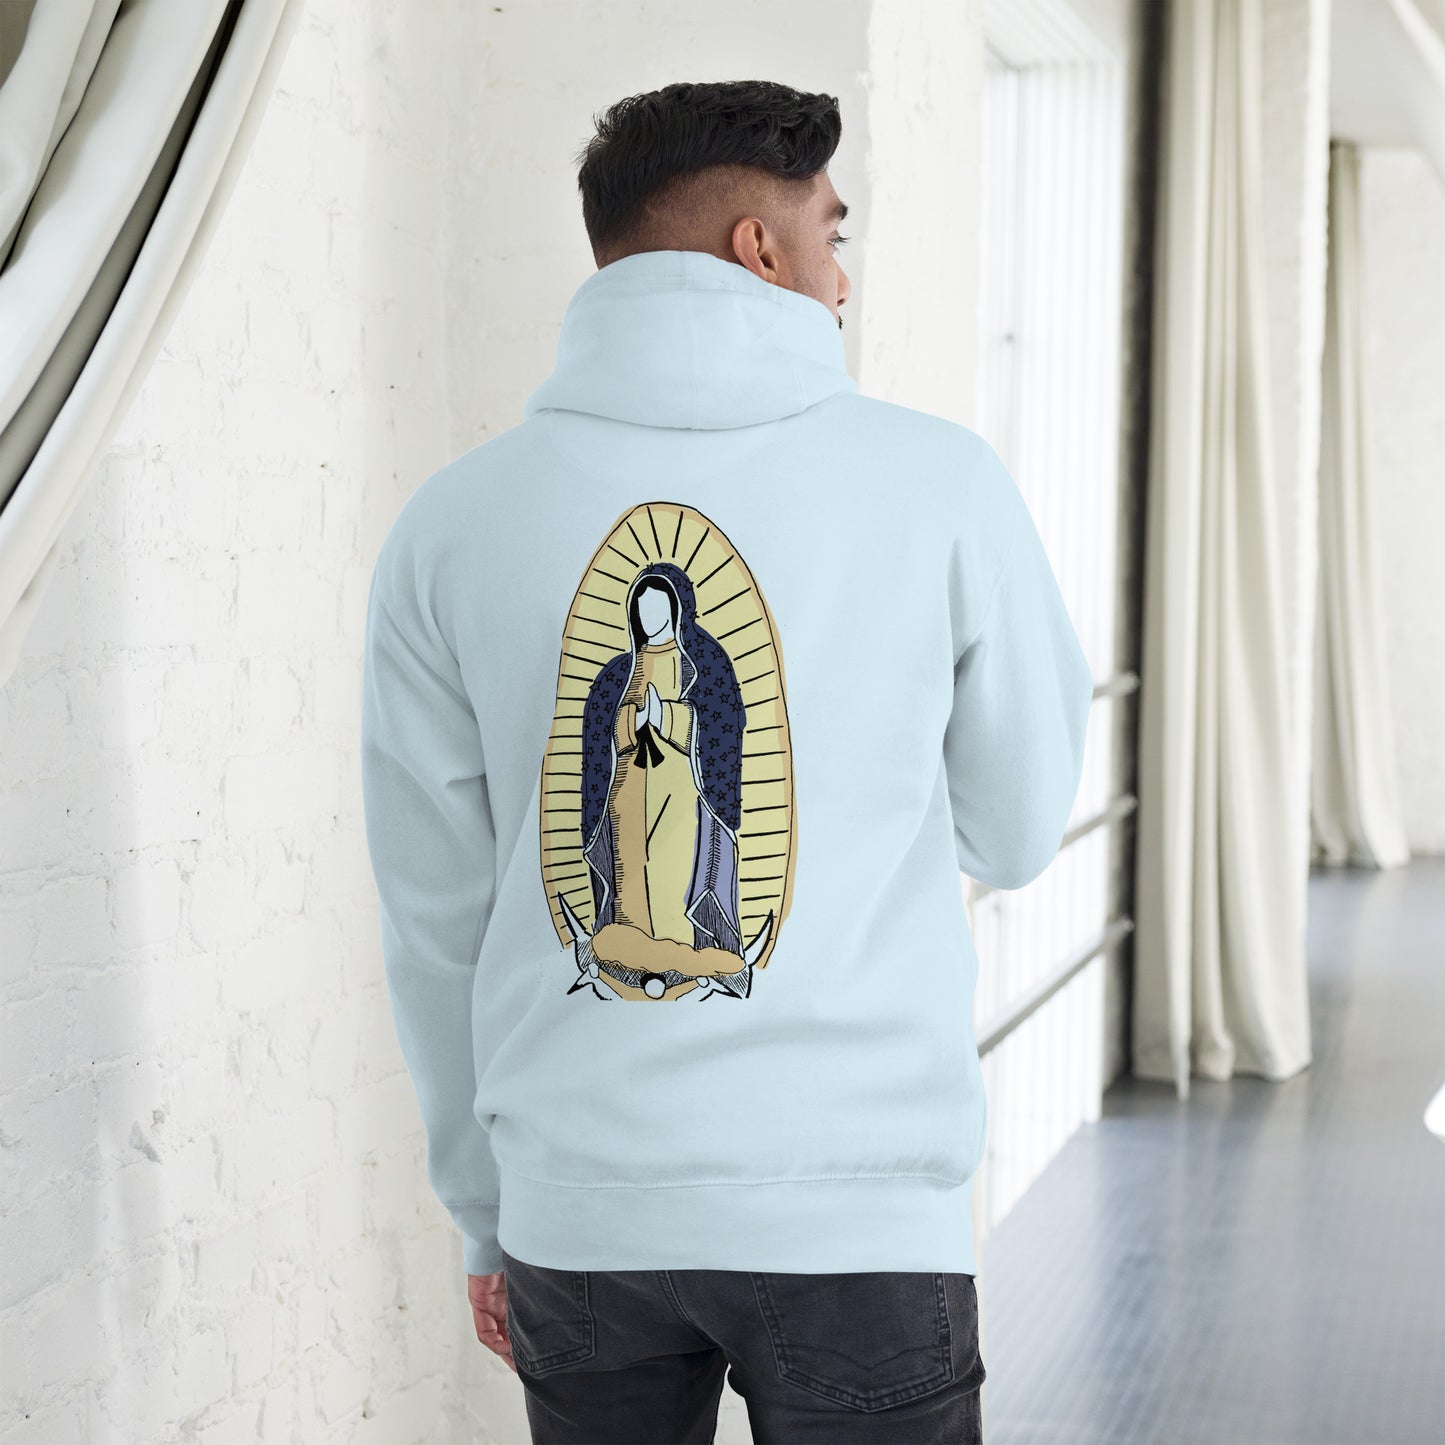 "Our Lady of Guadalupe" - Unisex Hoodie